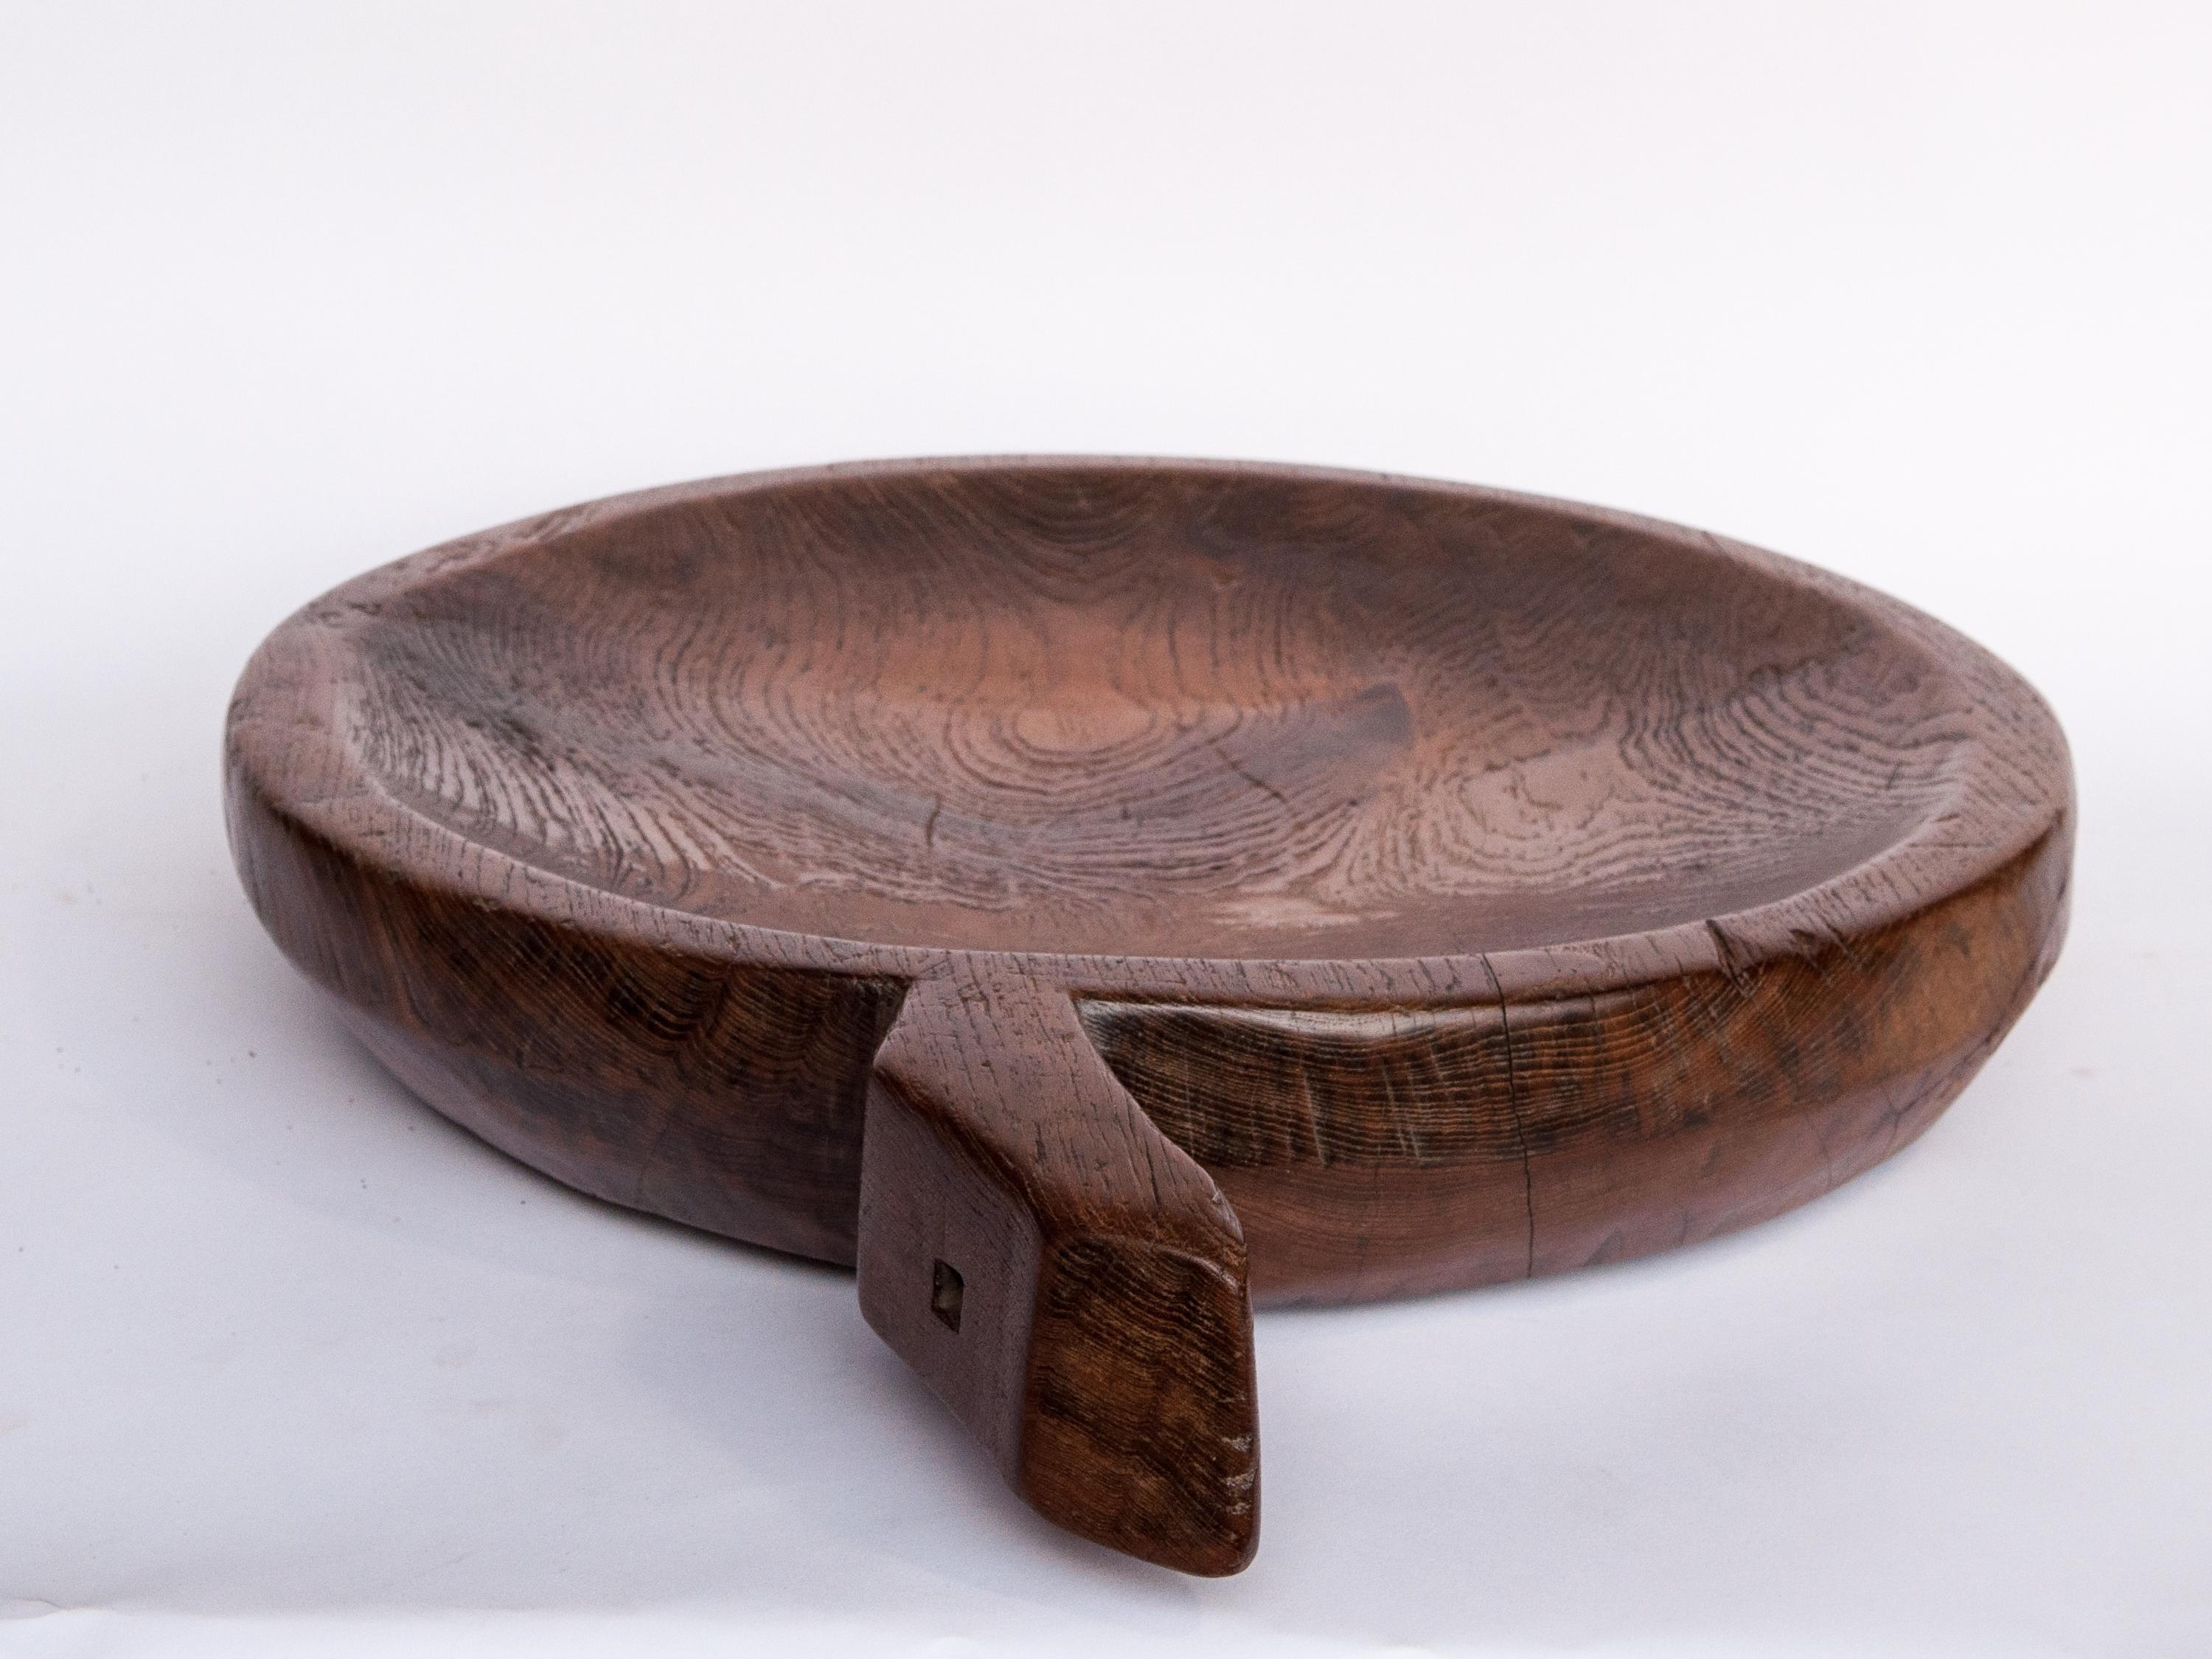 Organic Modern Large Vintage Teak Mortar Tray from Northern Thailand, Mid-20th Century